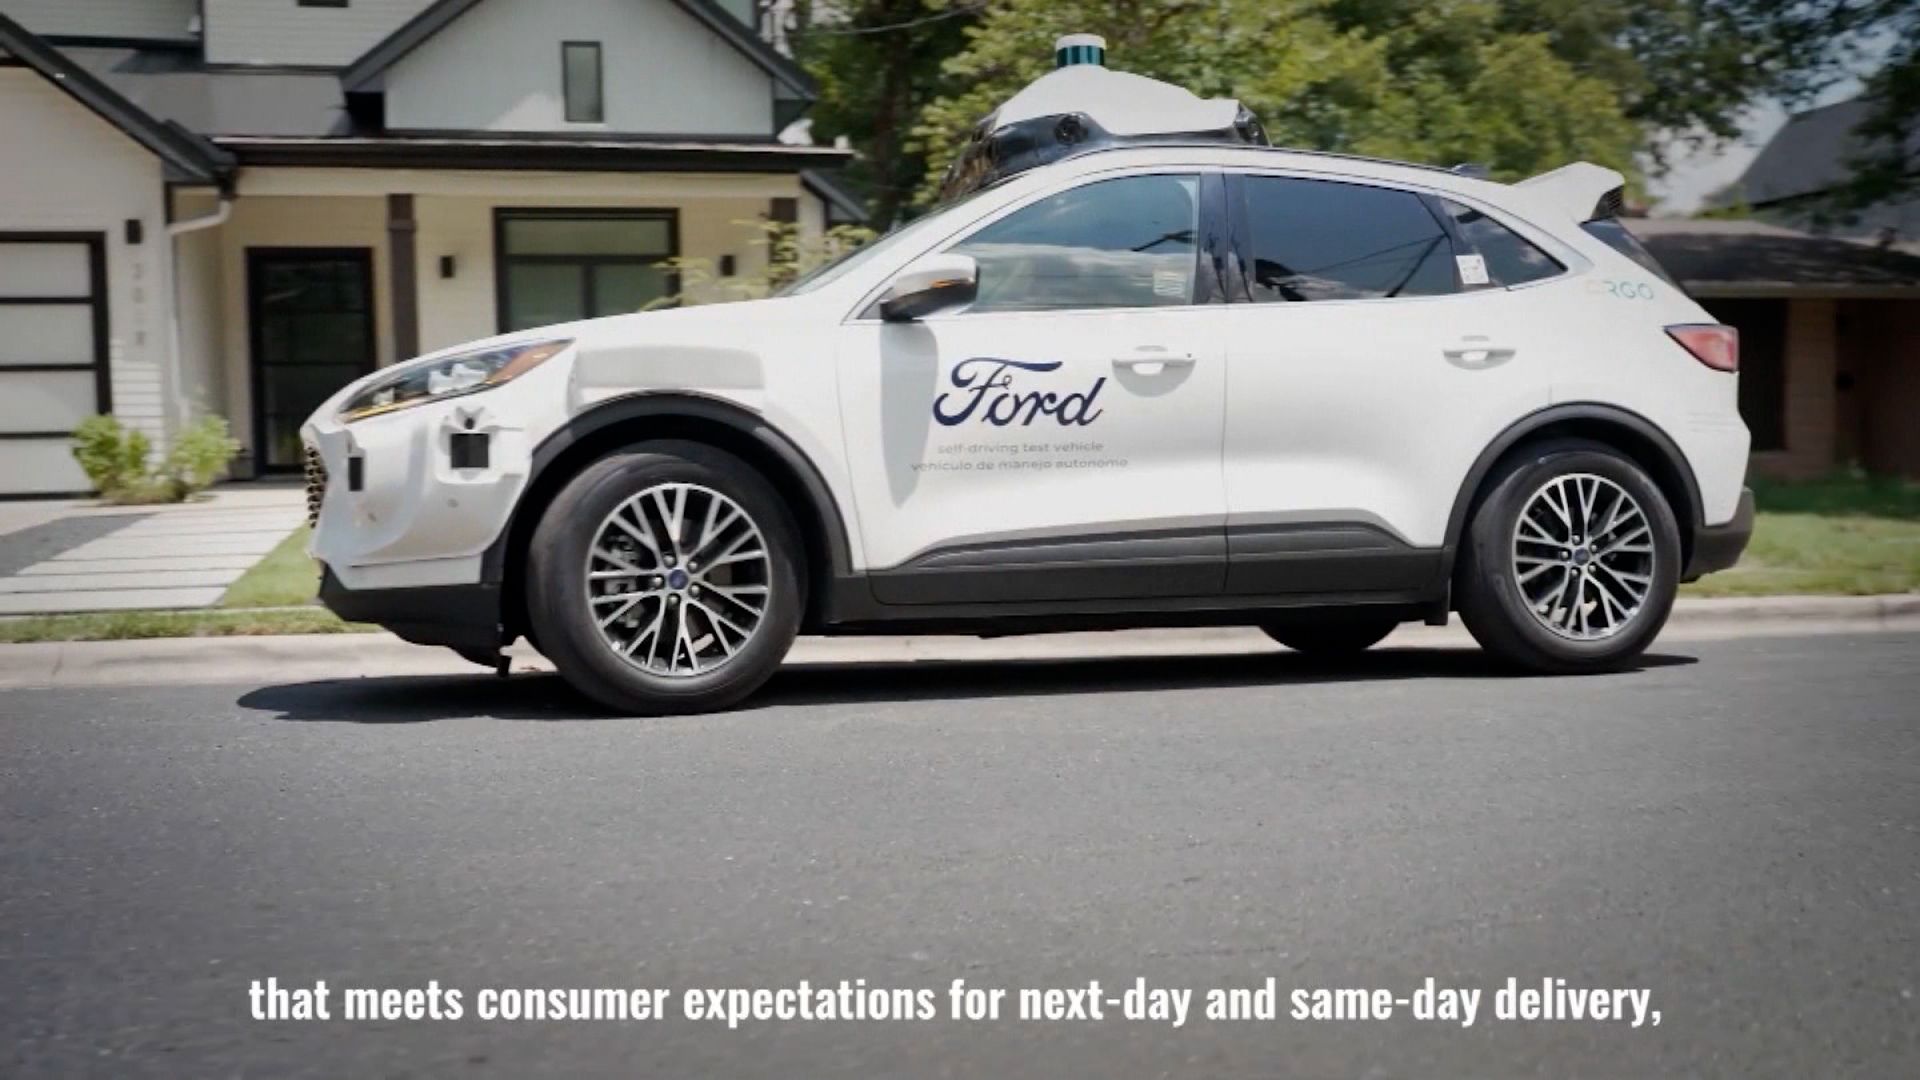 Ford and Walmart Partner to Deliver Goods With Self-Driving Cars